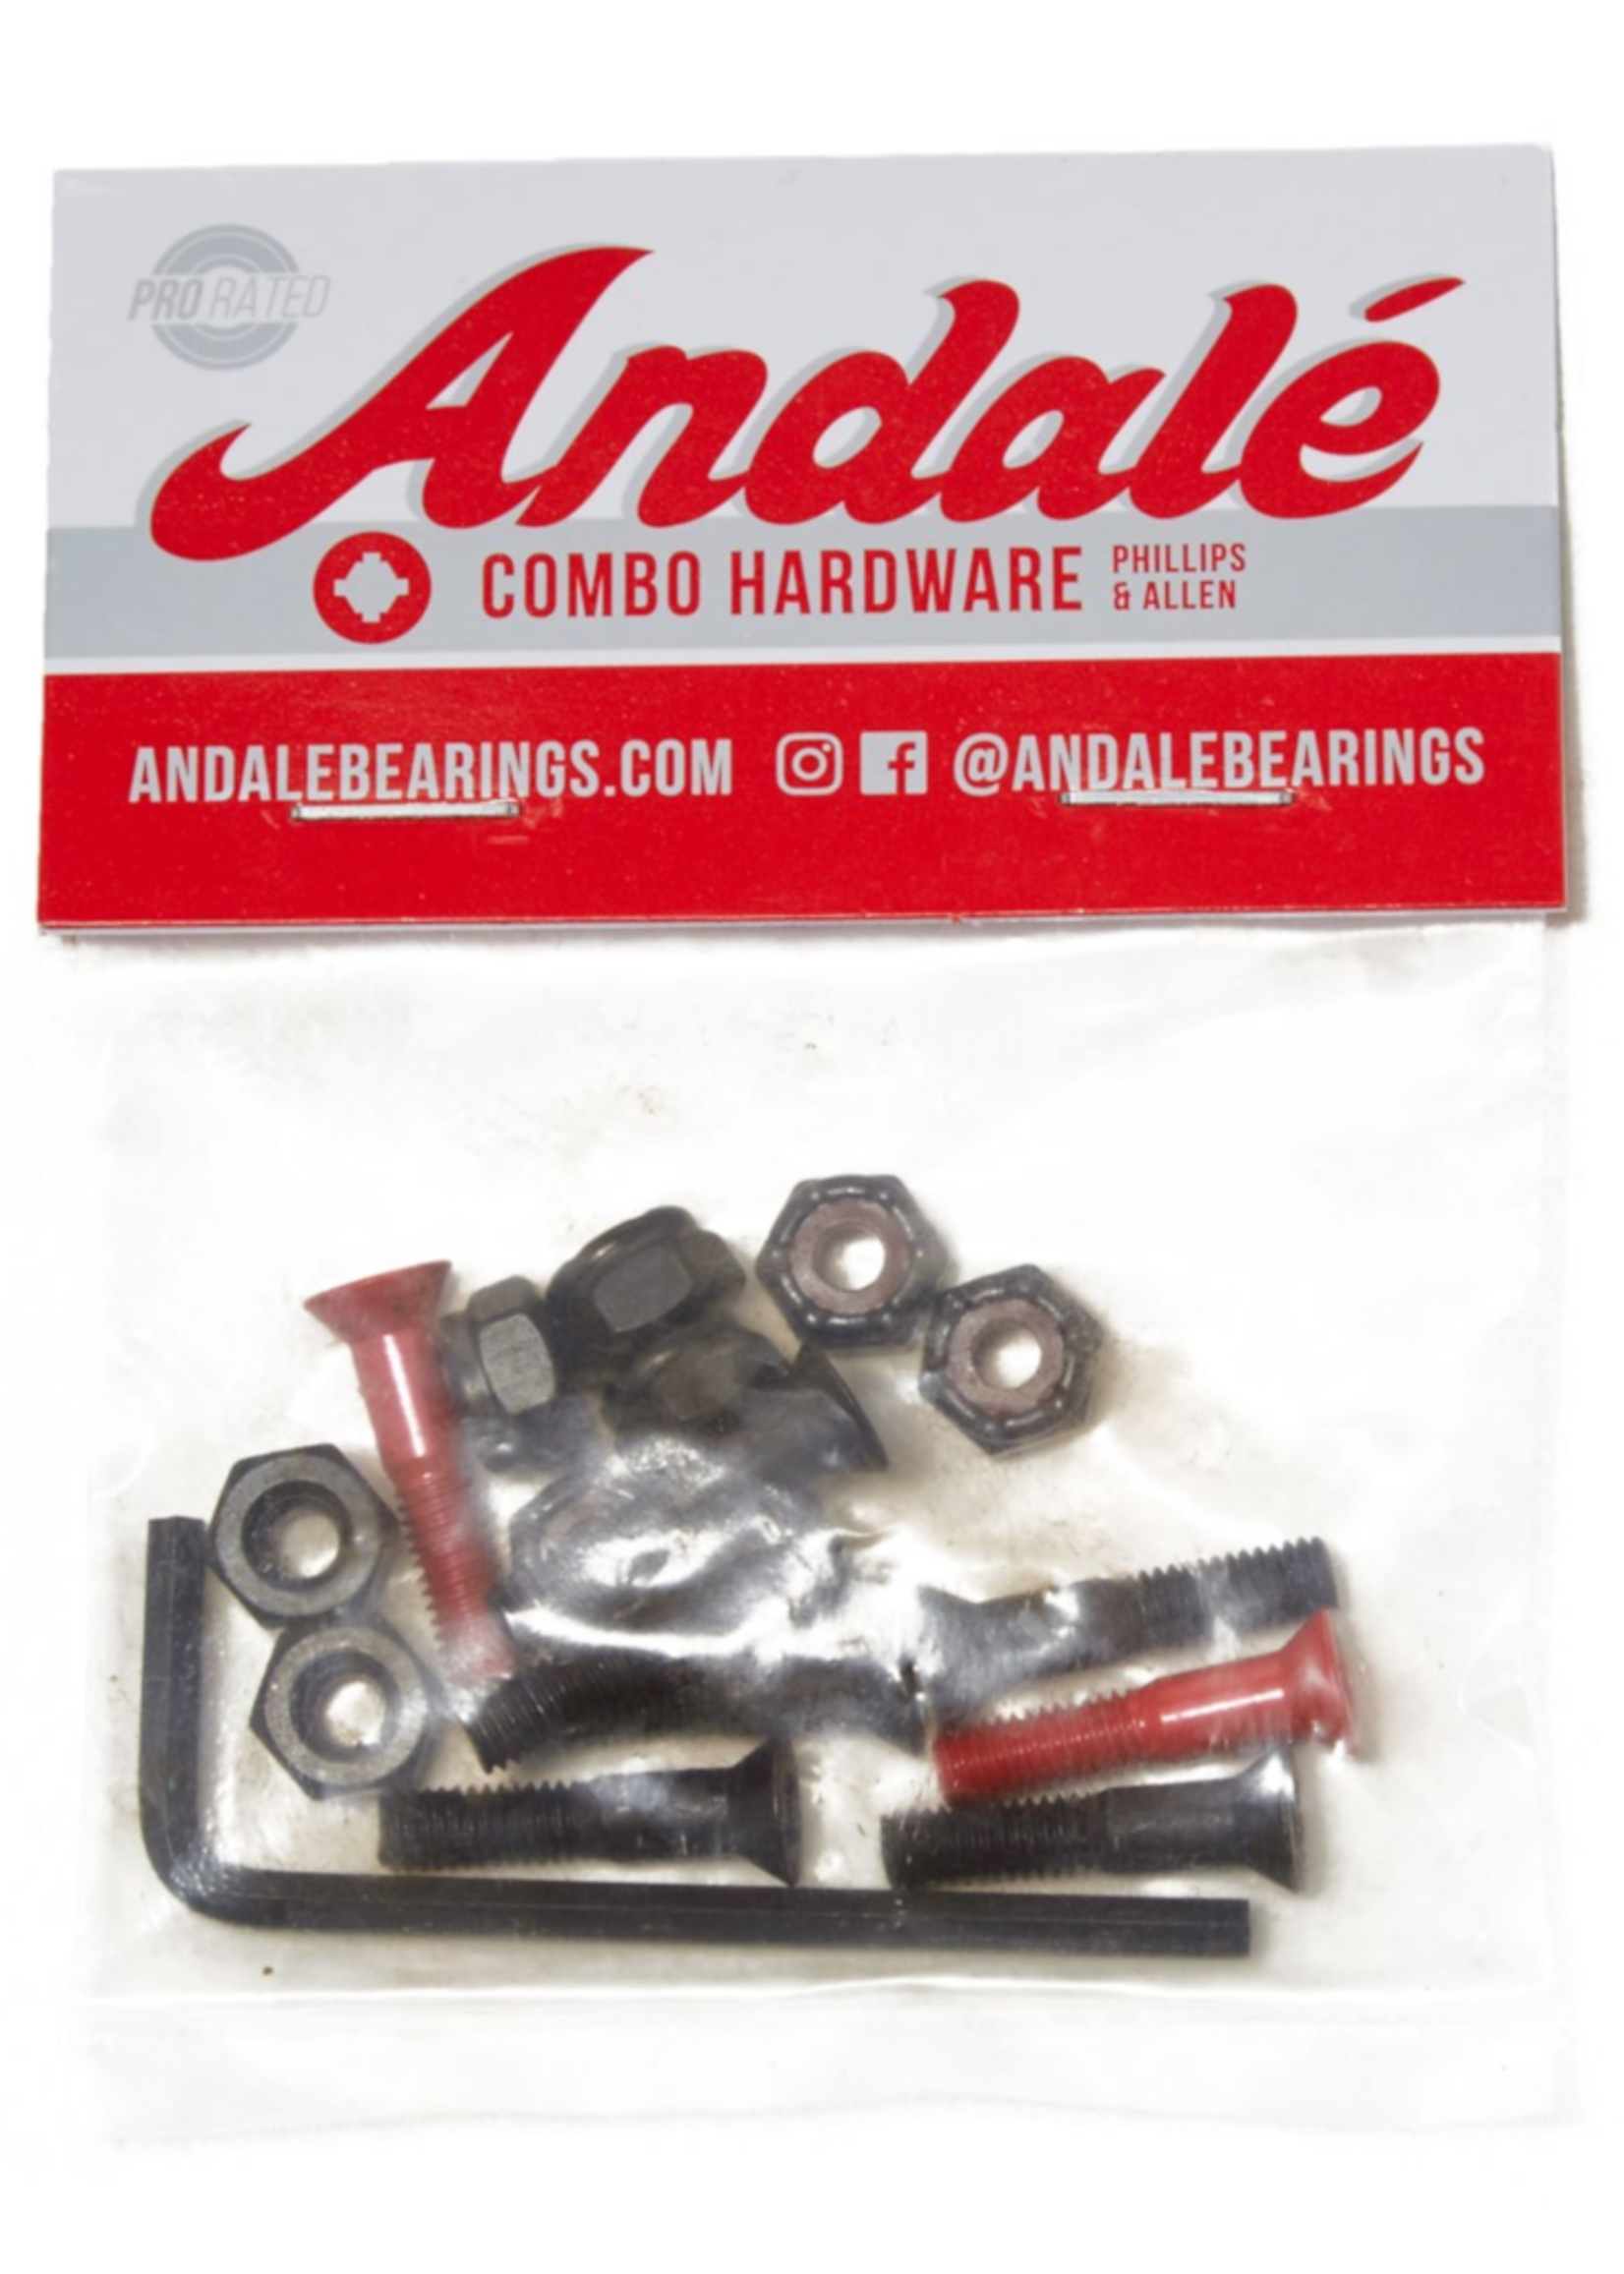 ANDALE BEARINGS ANDALE 7/8" RED COMBO HARDWARE